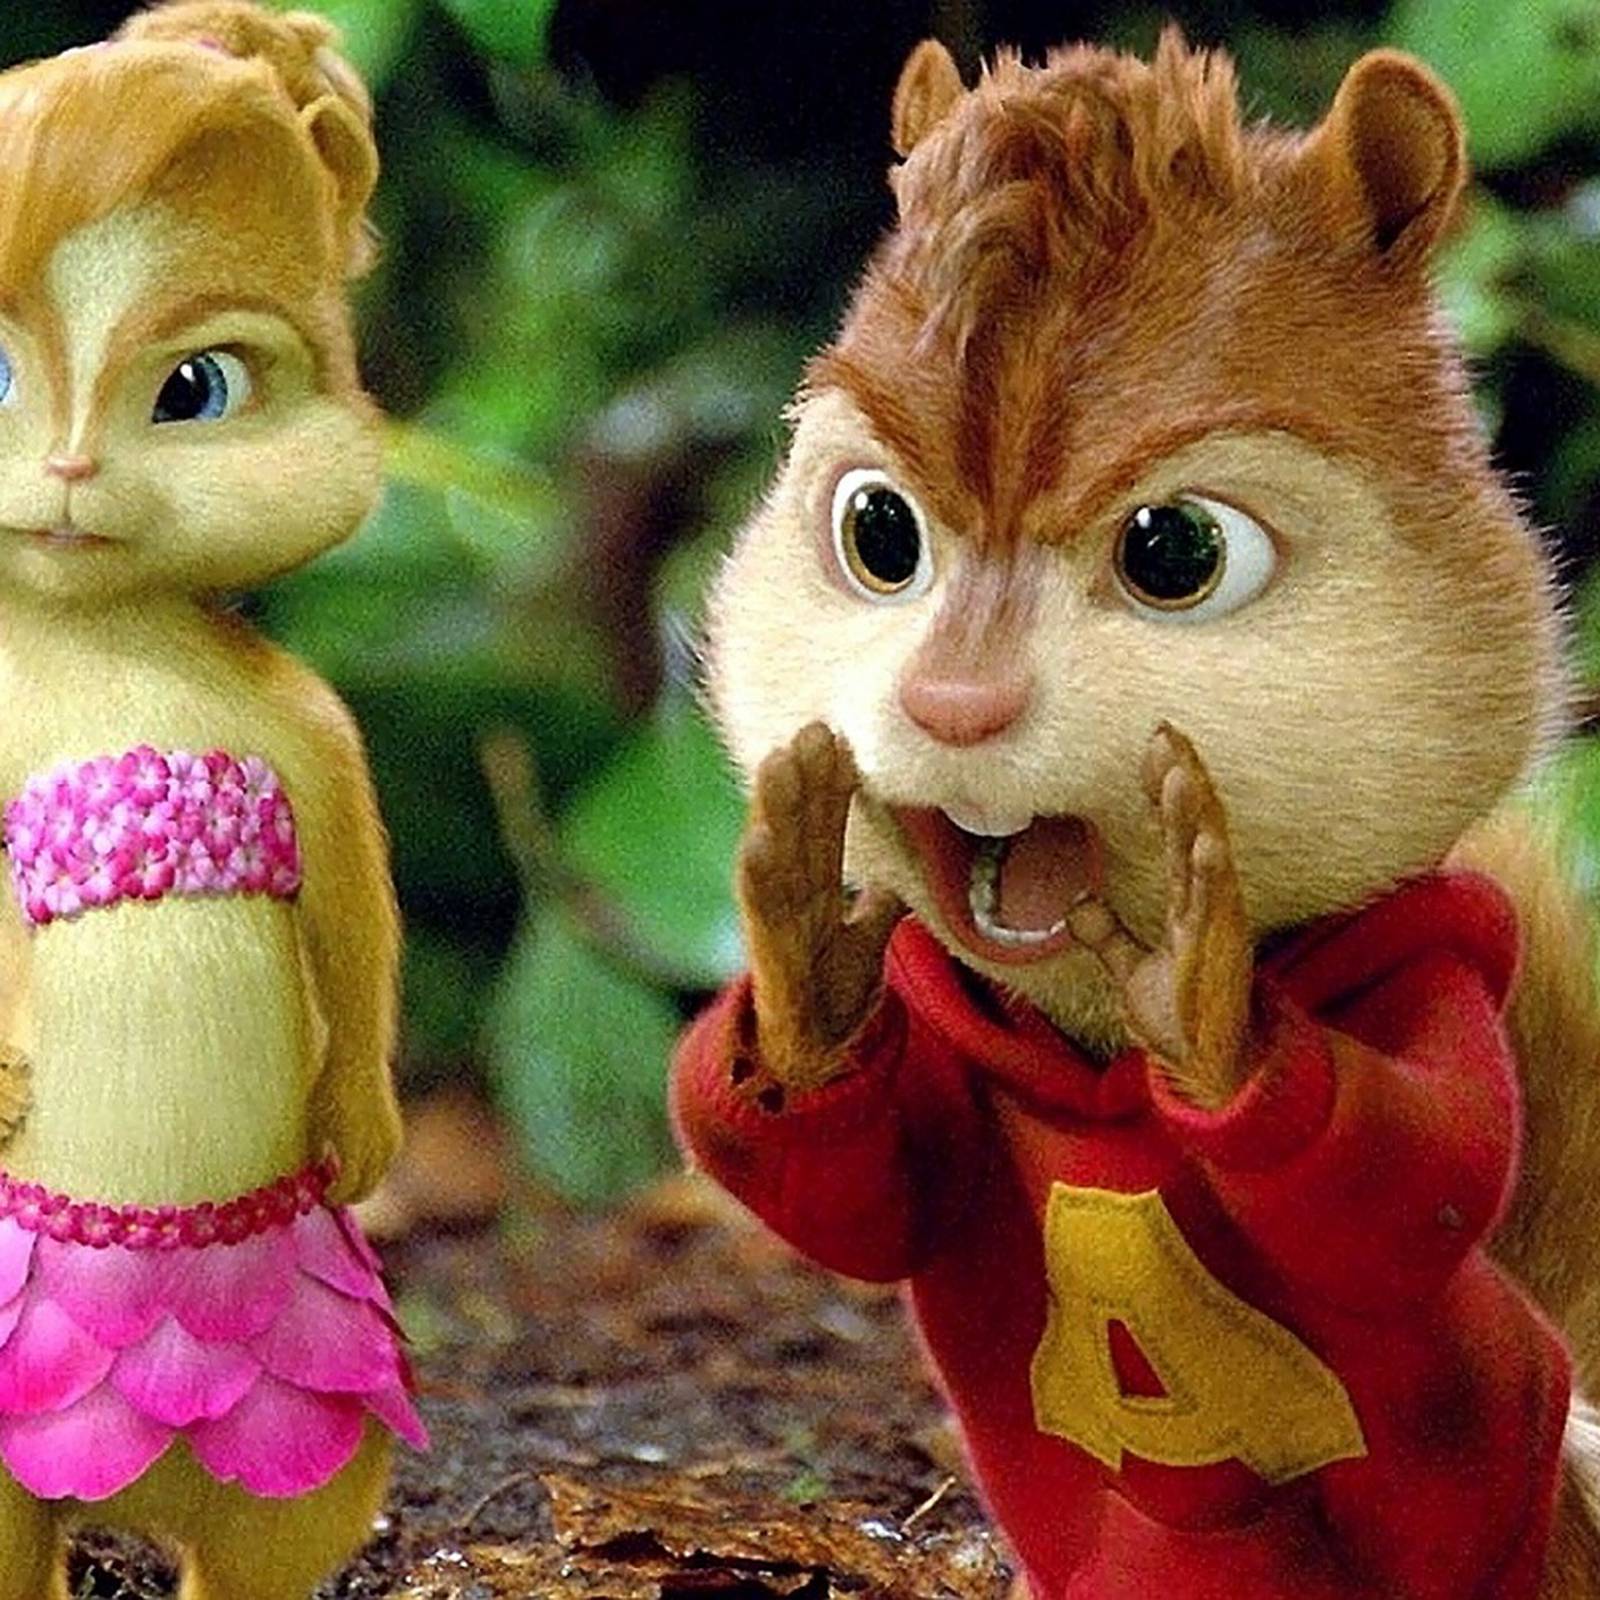 cody madison recommends which chipmunk is getting the best head pic